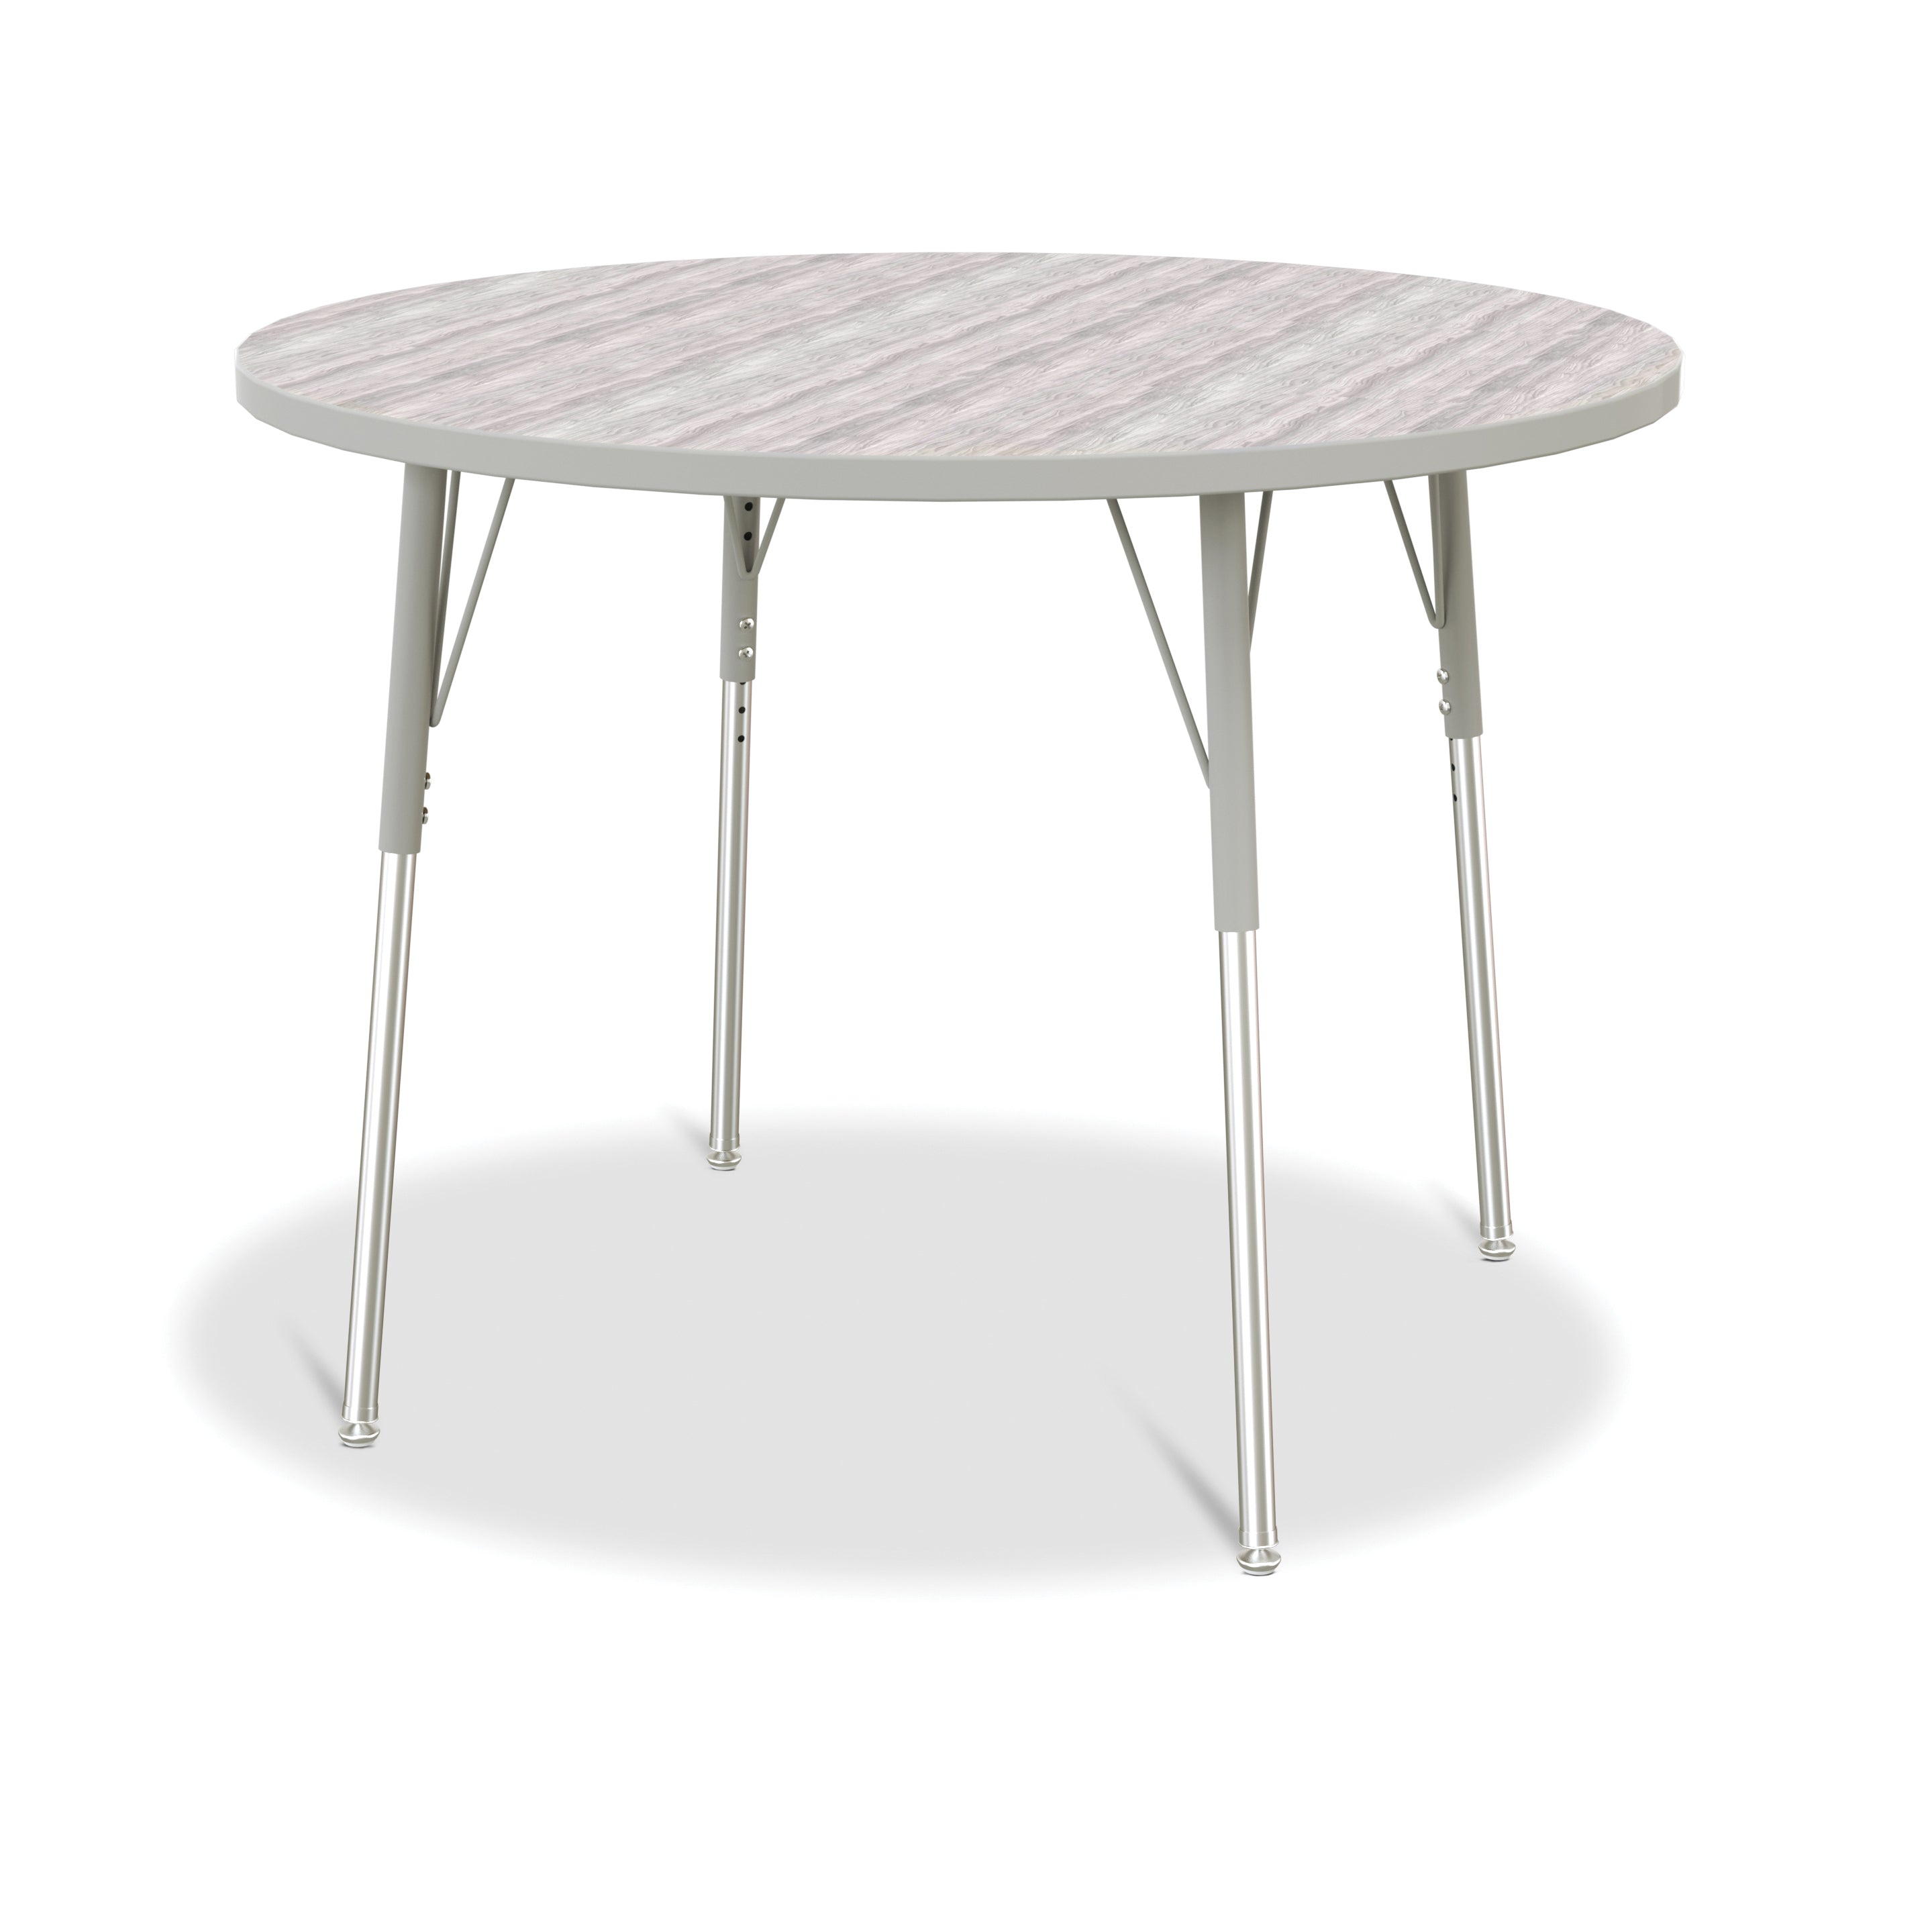 6468JCA450, Berries Round Activity Table - 42" Diameter, A-height - Driftwood Gray/Gray/Gray